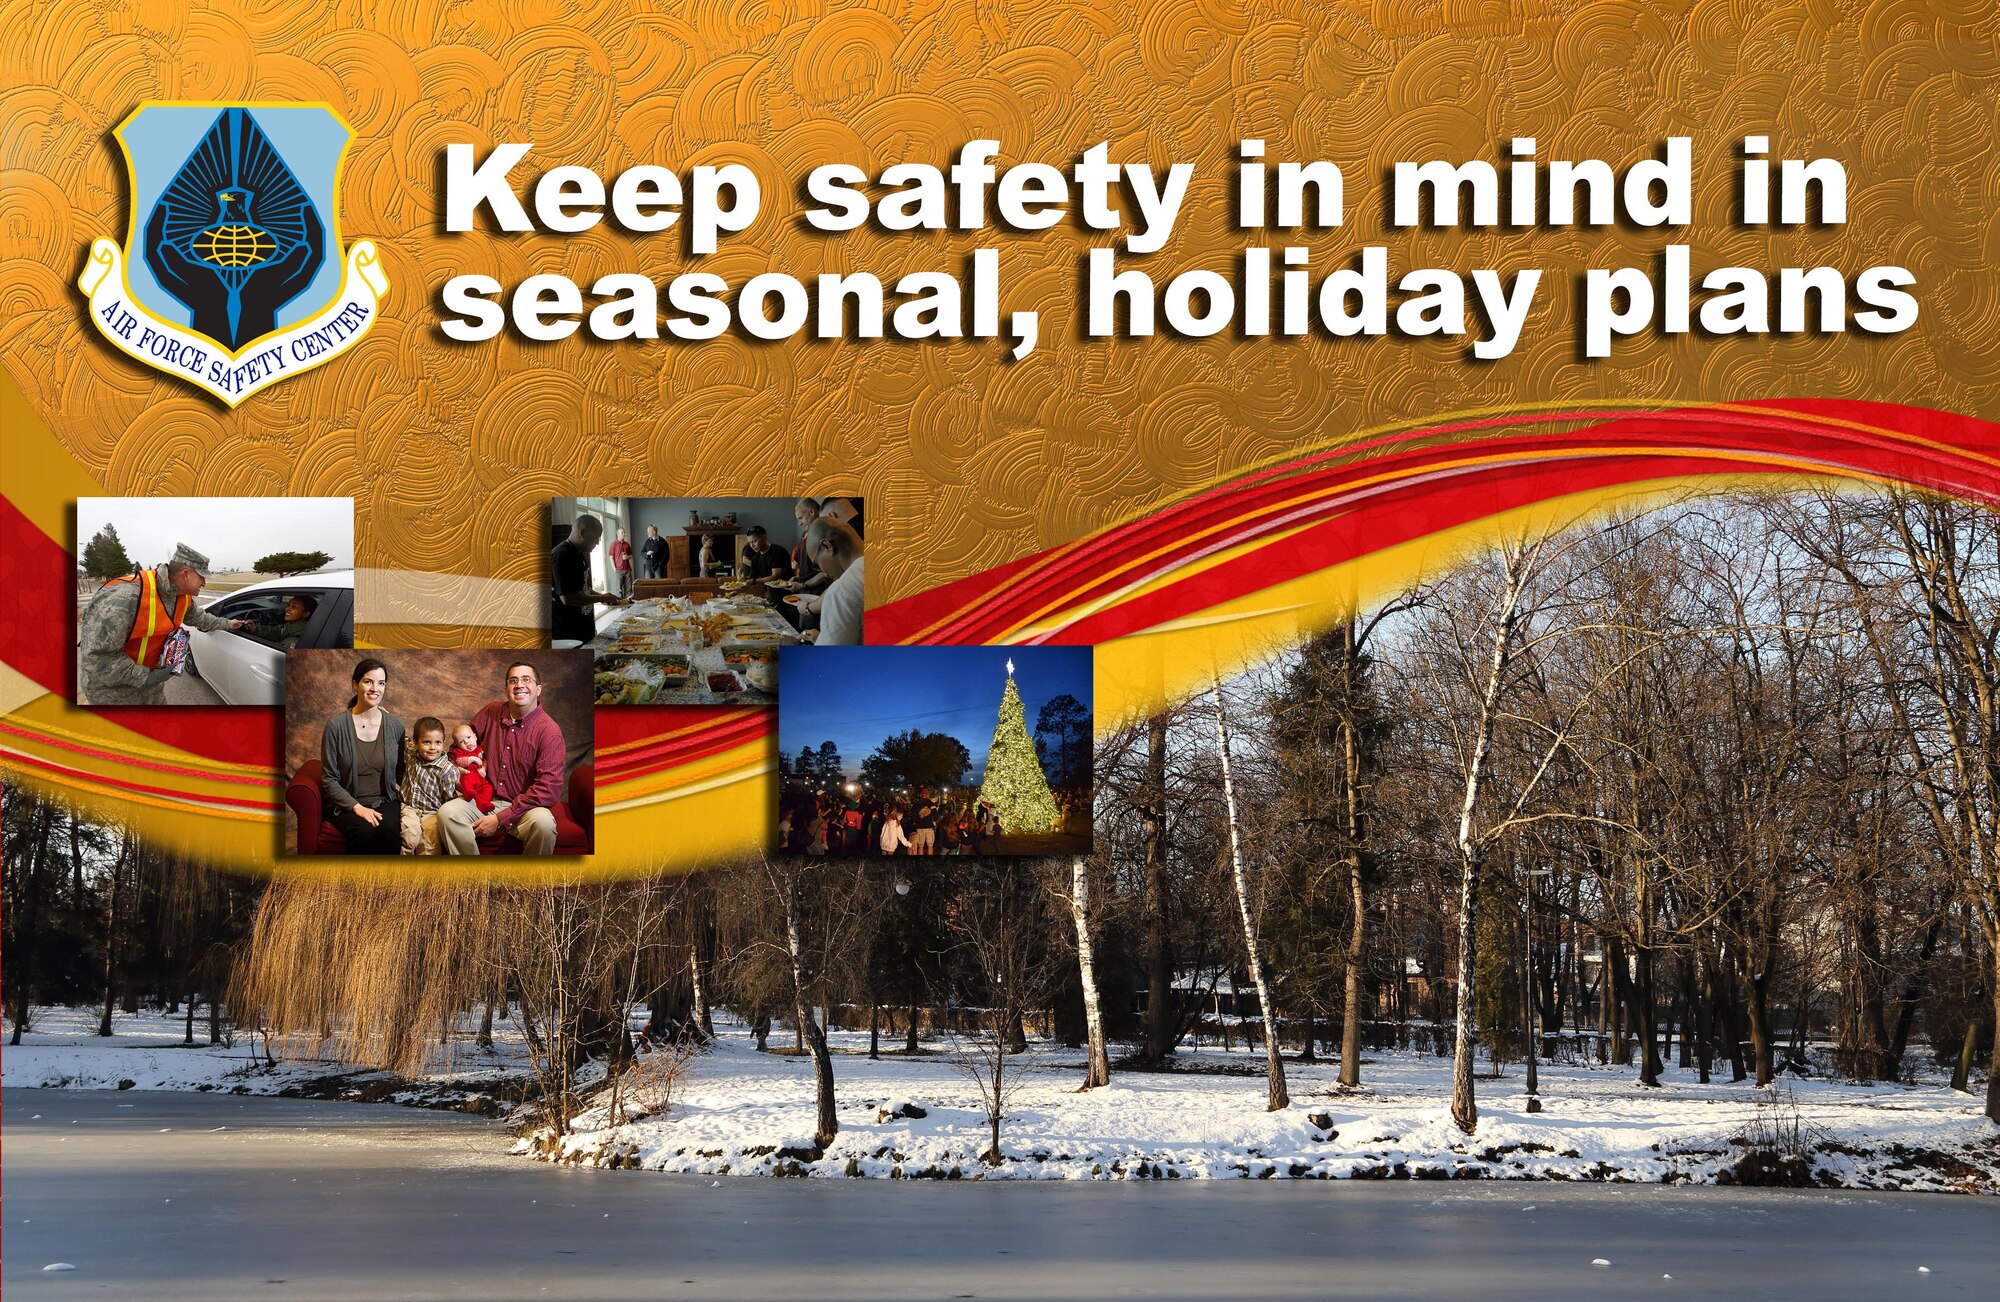 Keep safety in mind in seasonal, holiday plans